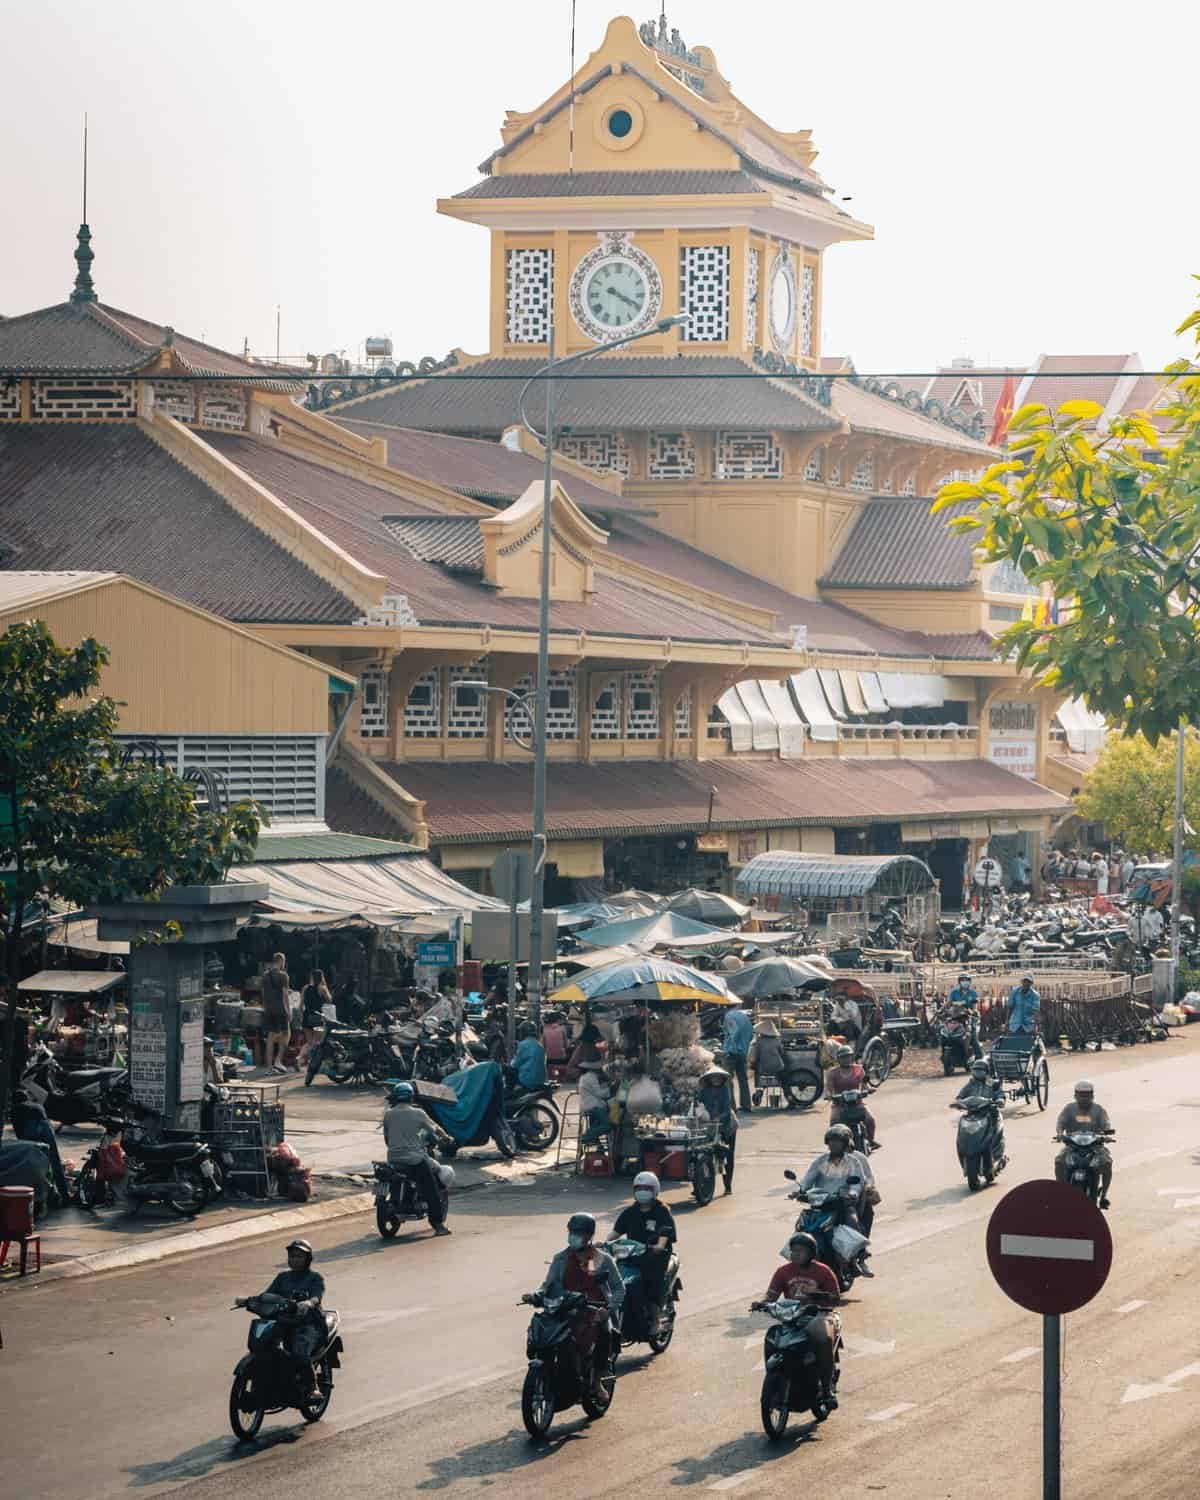 A street view in Vietnam filled with motorbikes.